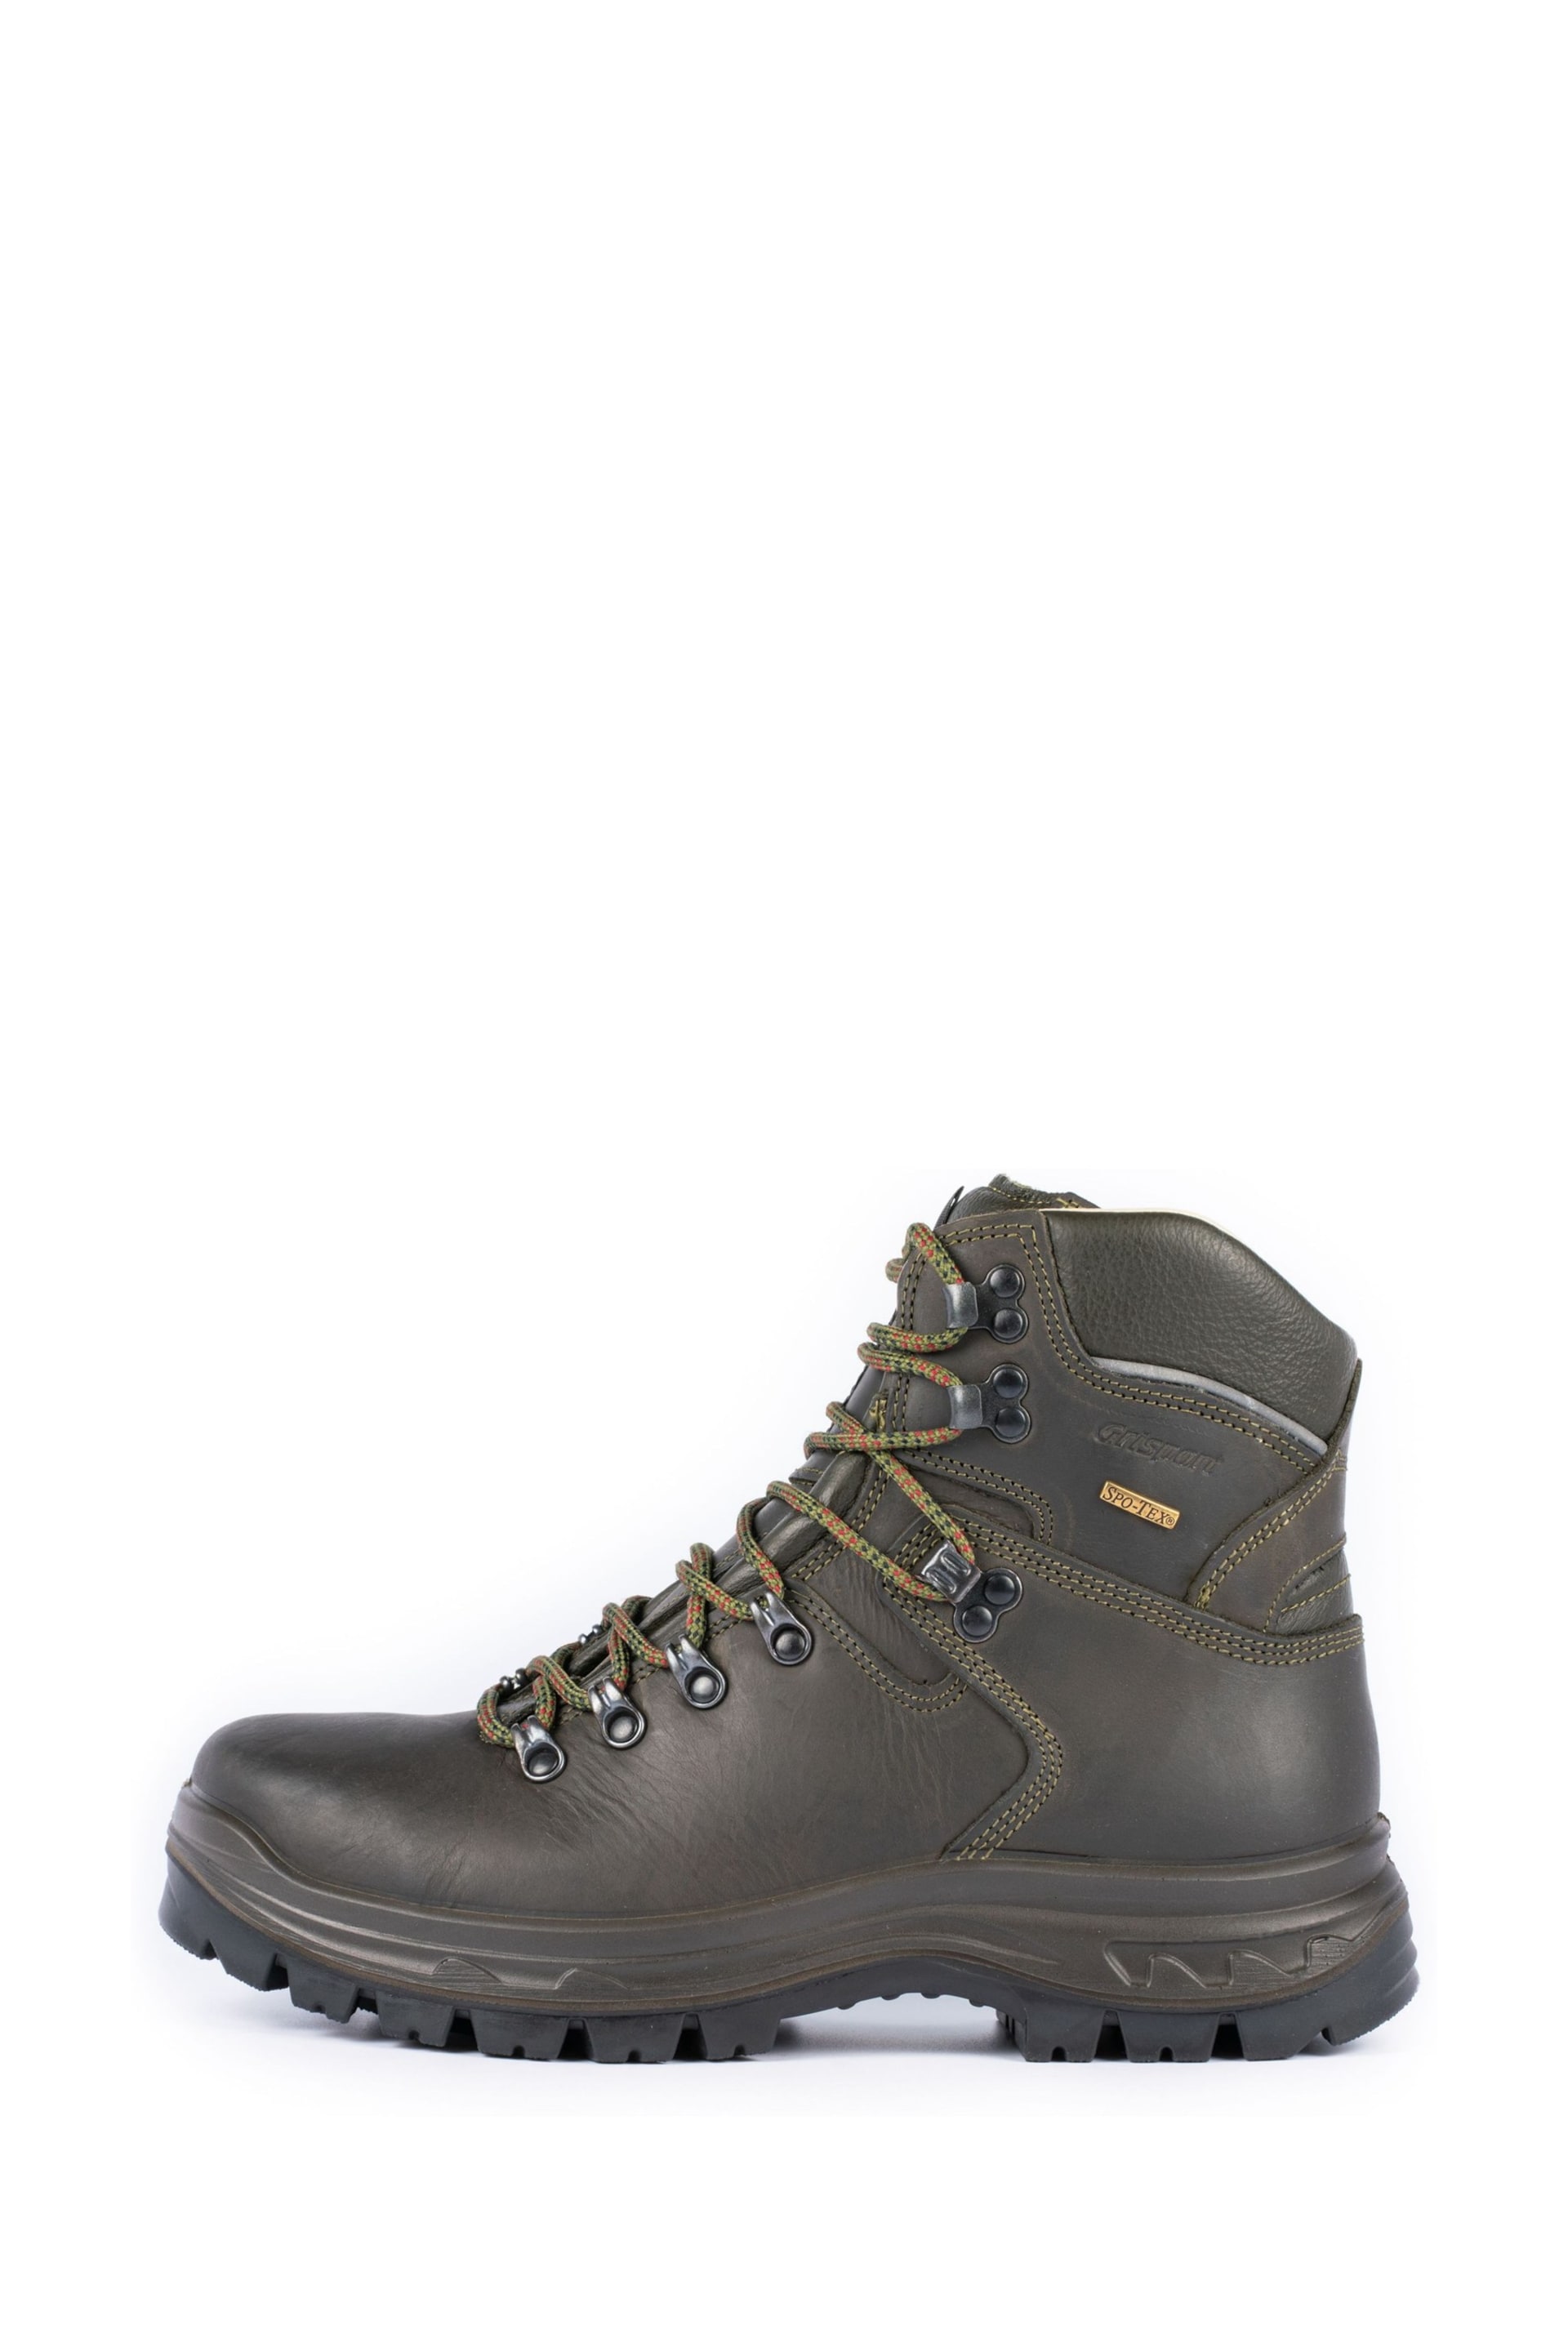 Grisport Rampage Green Waterproof and Breathable Hiking Boots - Image 2 of 7